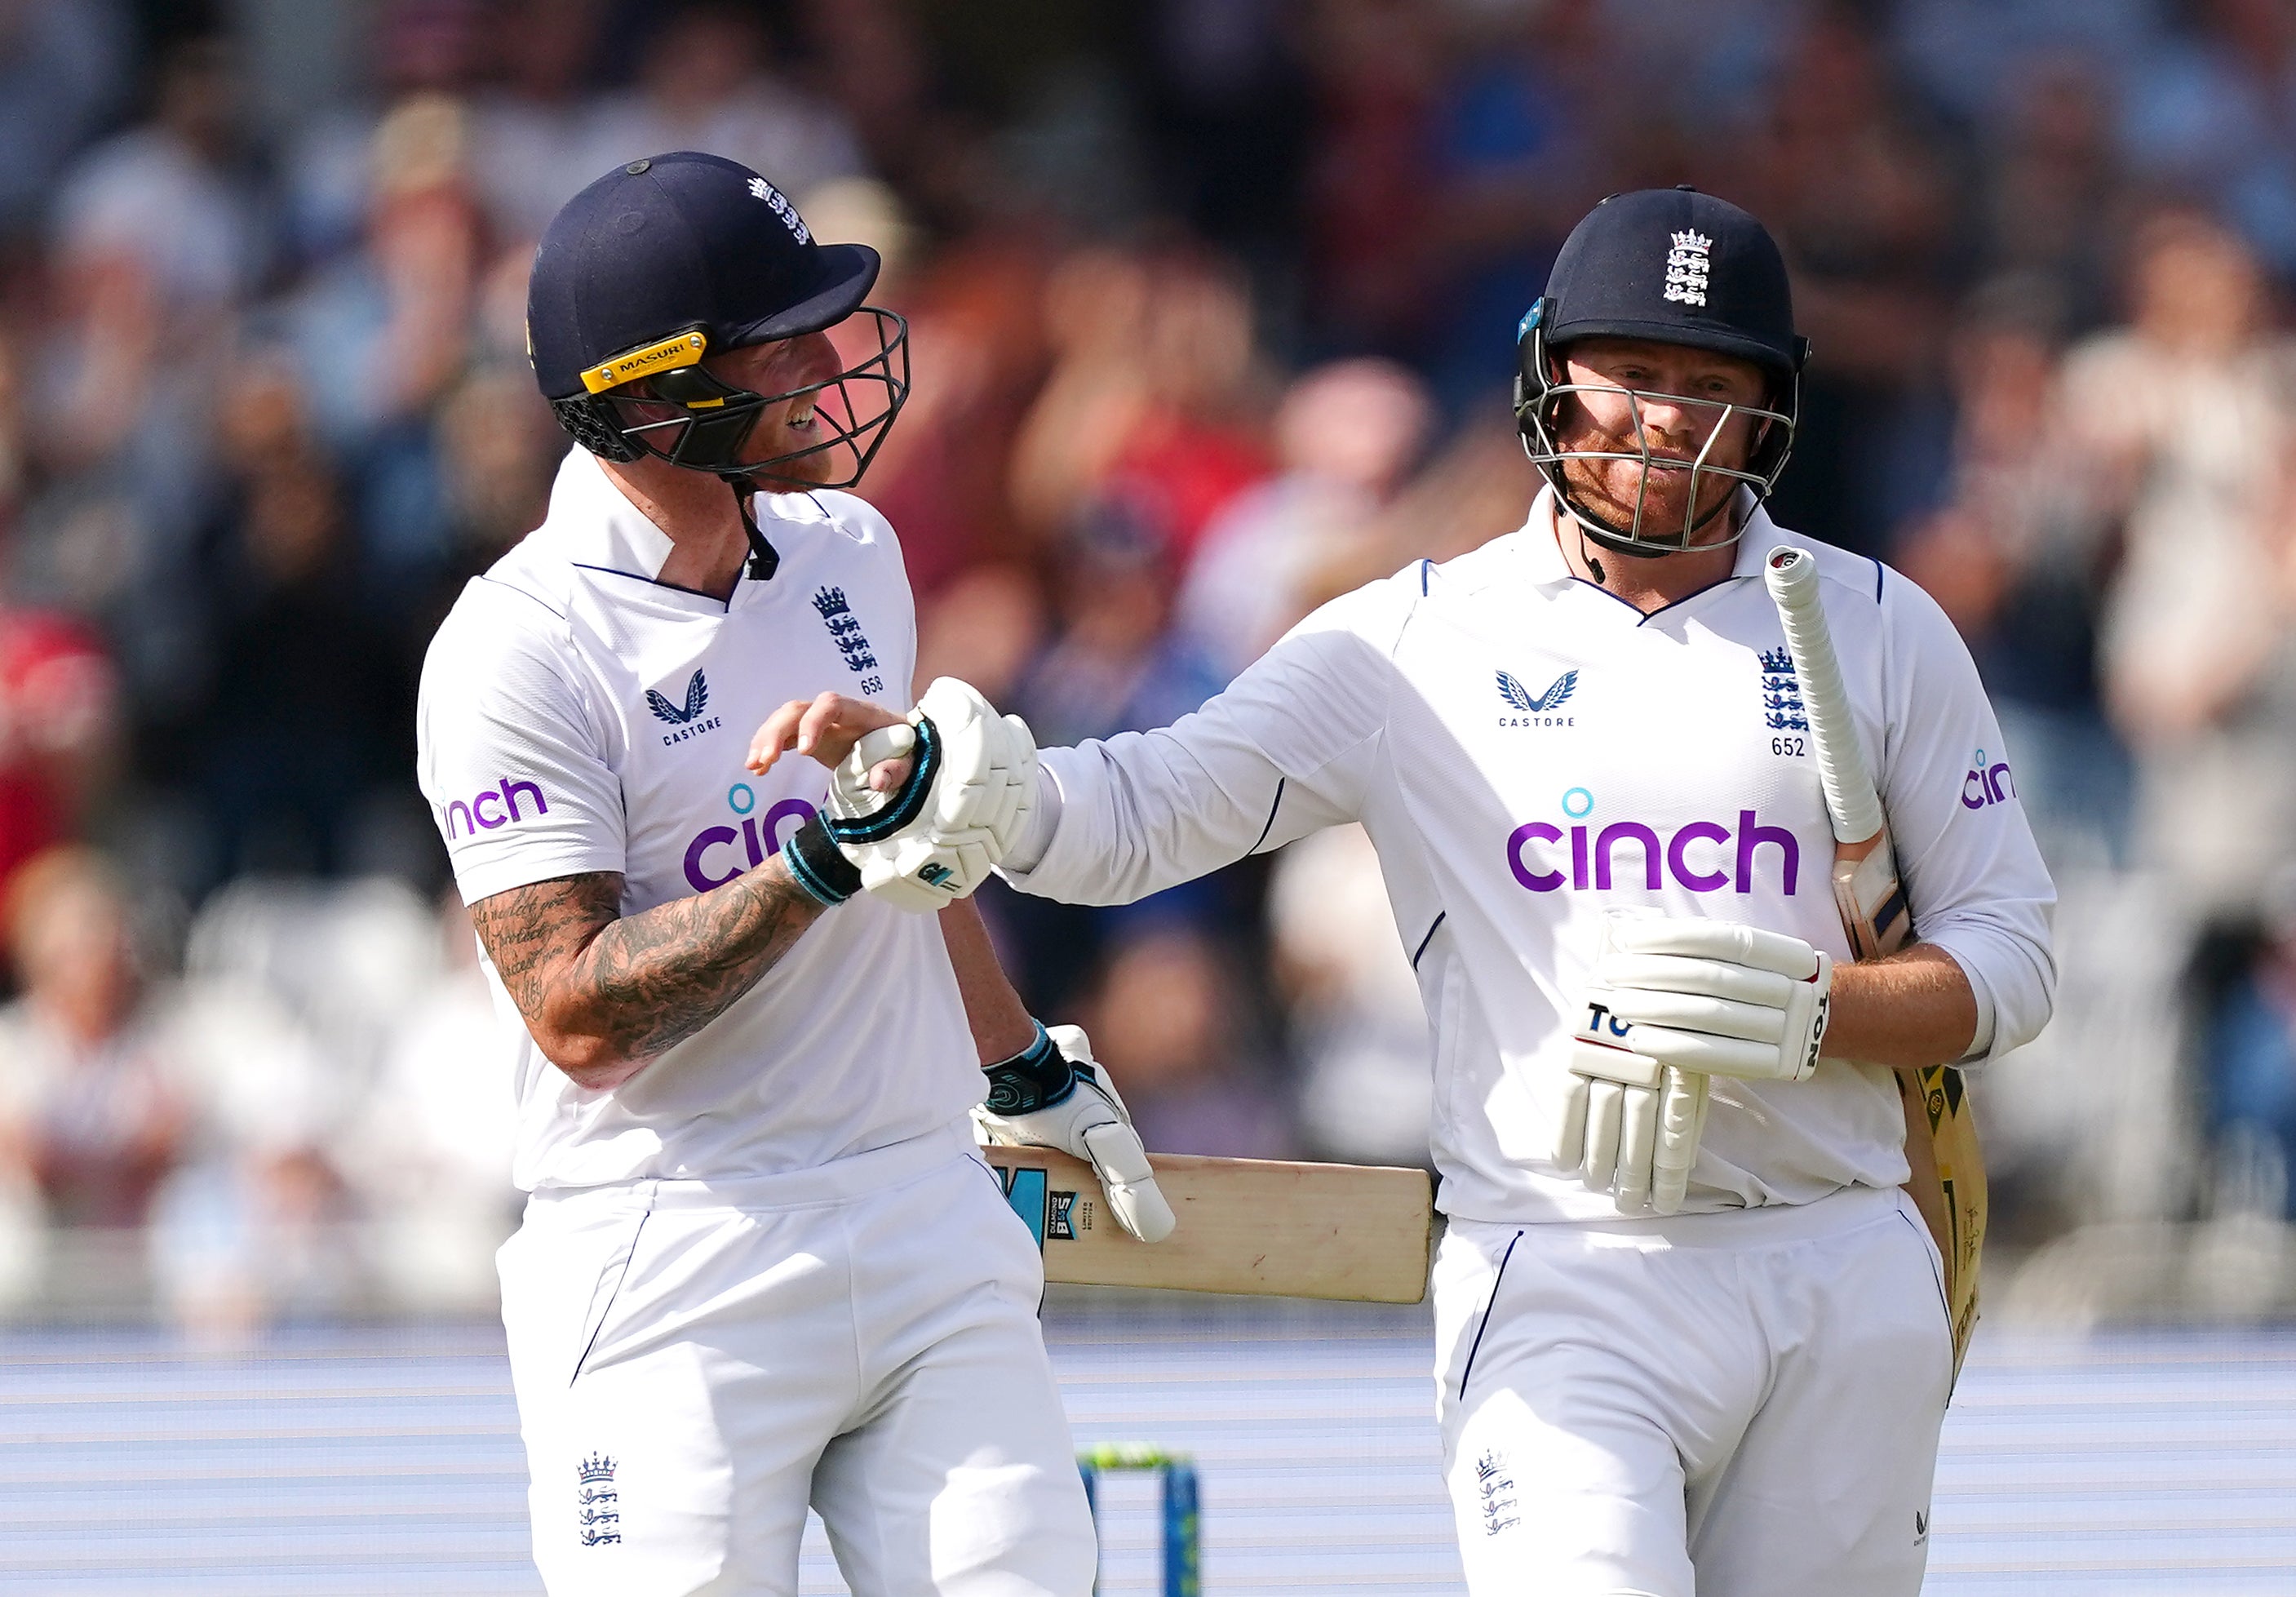 Jonny Bairstow was congratulated by Ben Stokes after being caught out for 136 on the final day against New Zealand at Trent Bridge (Mike Egerton/PA)